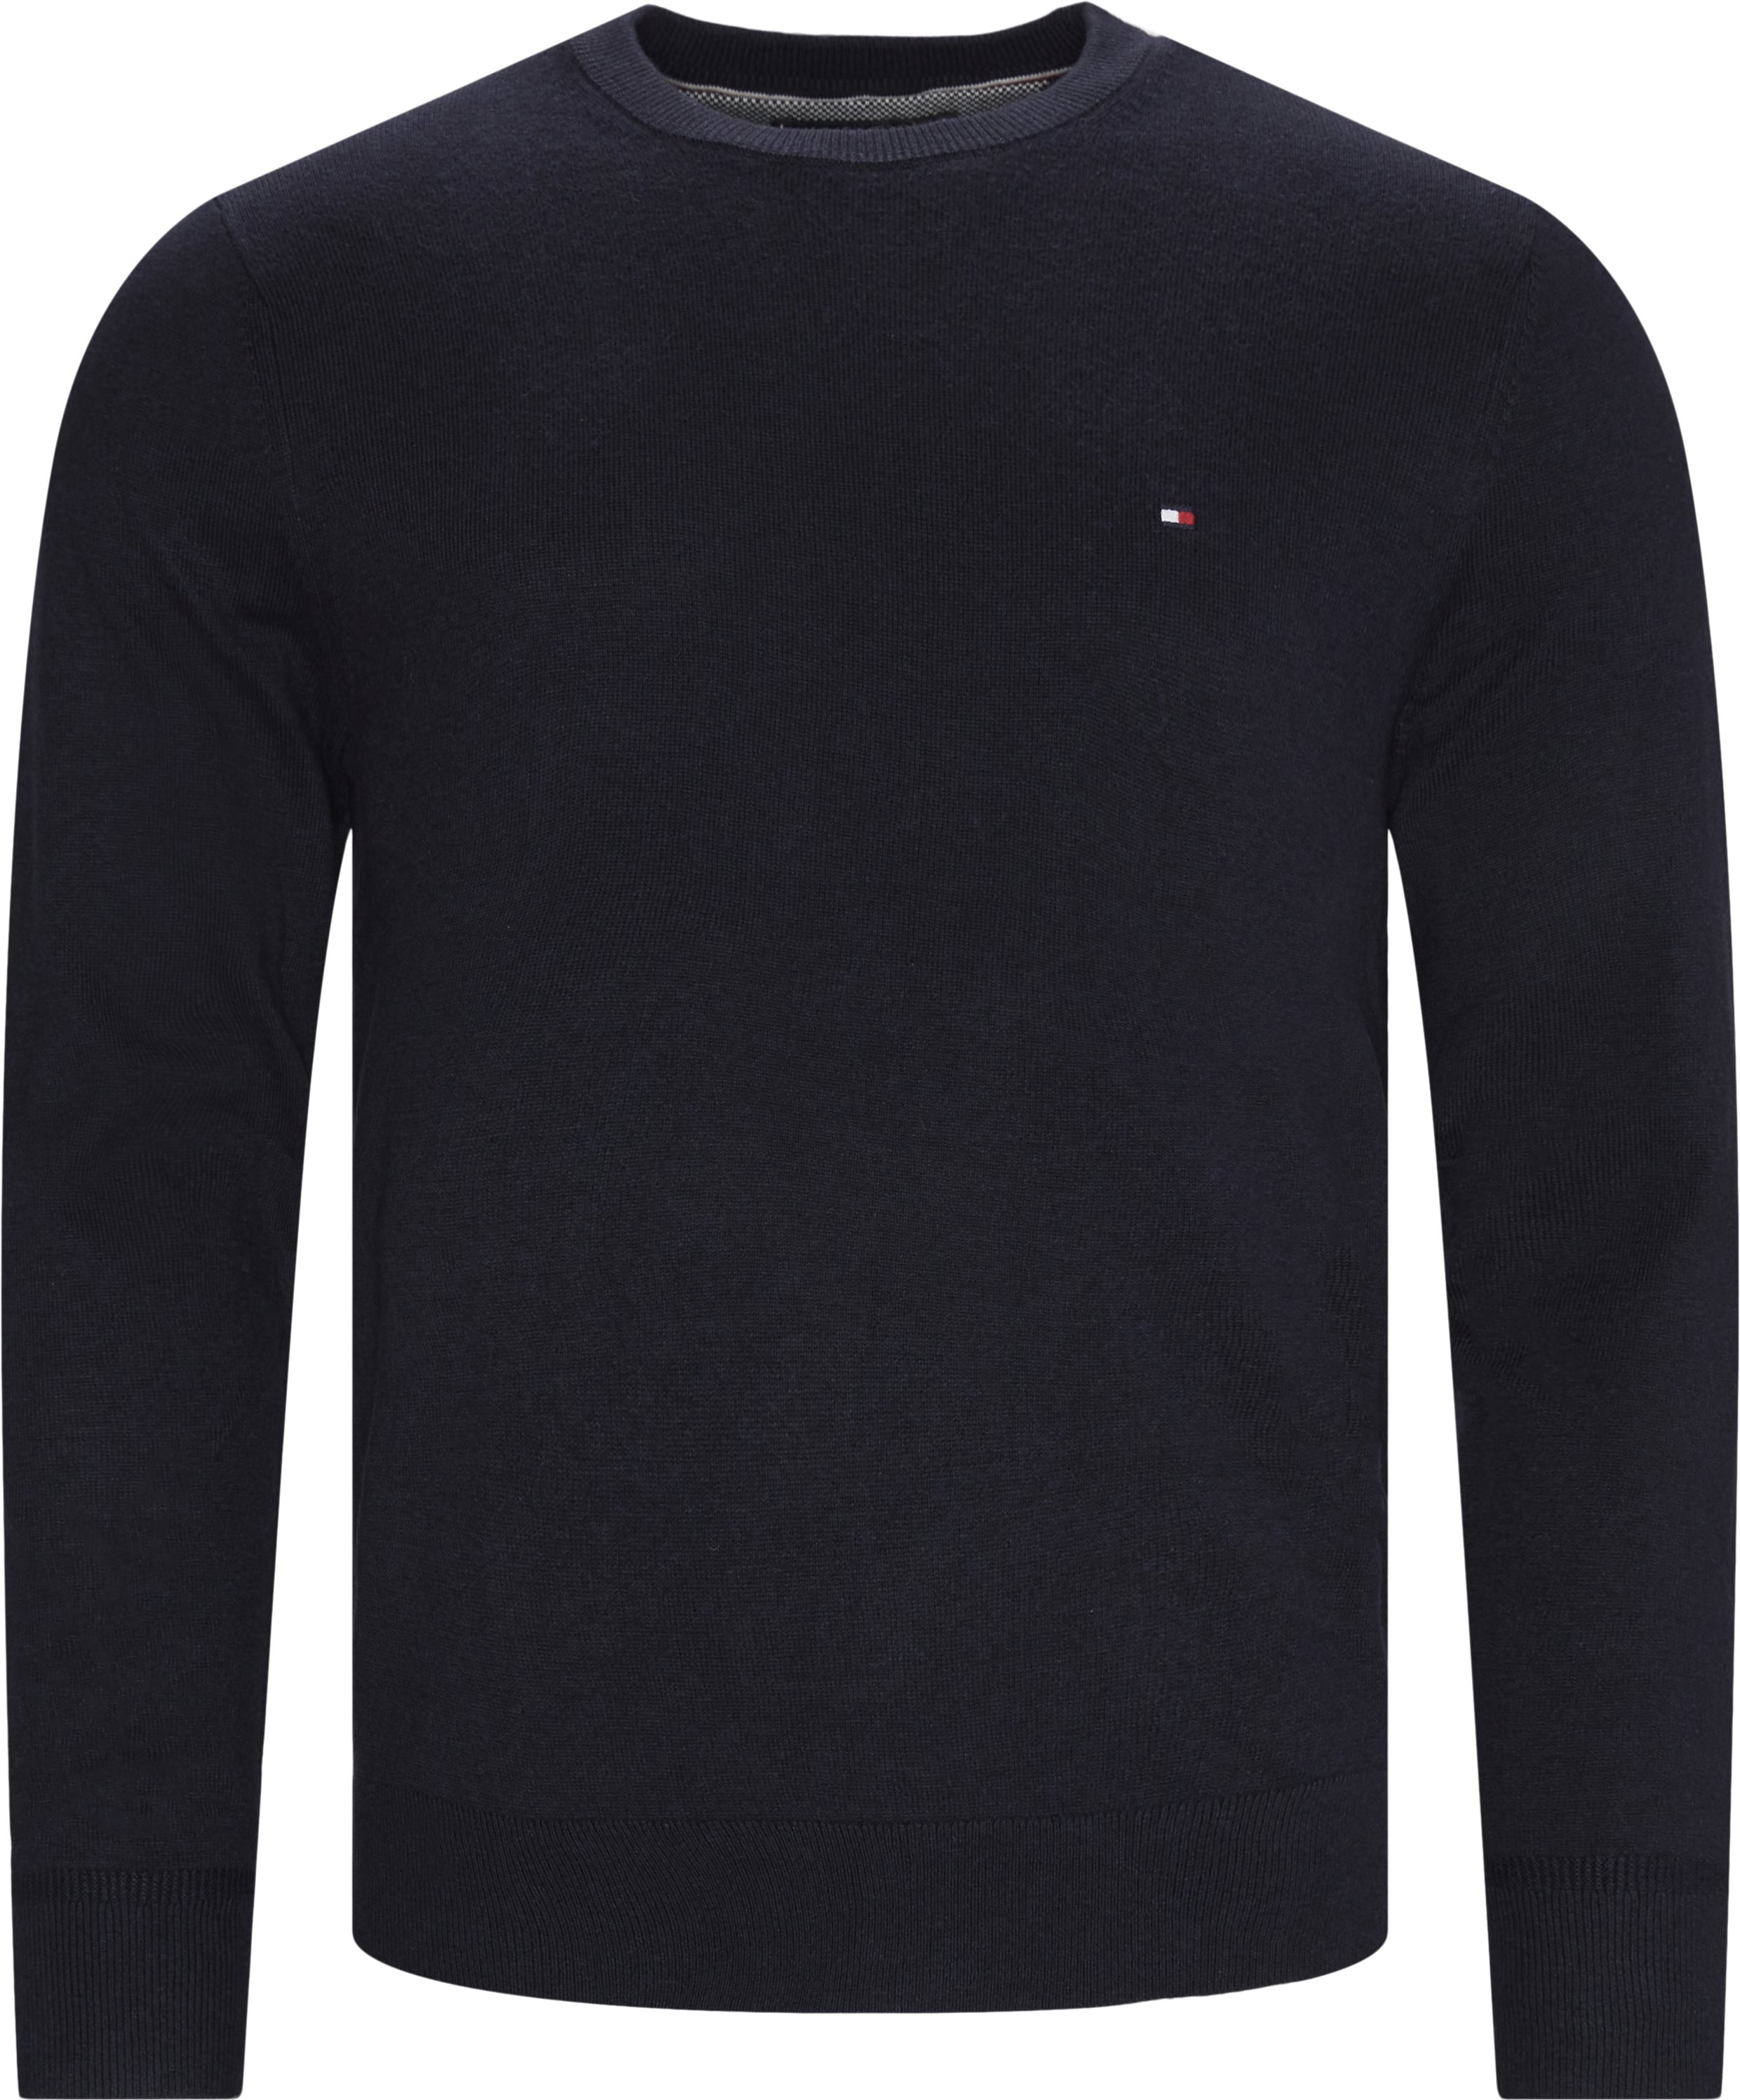 11674 PIMA COTTON CASHMERE Knitwear NAVY from Tommy Hilfiger 60 EUR